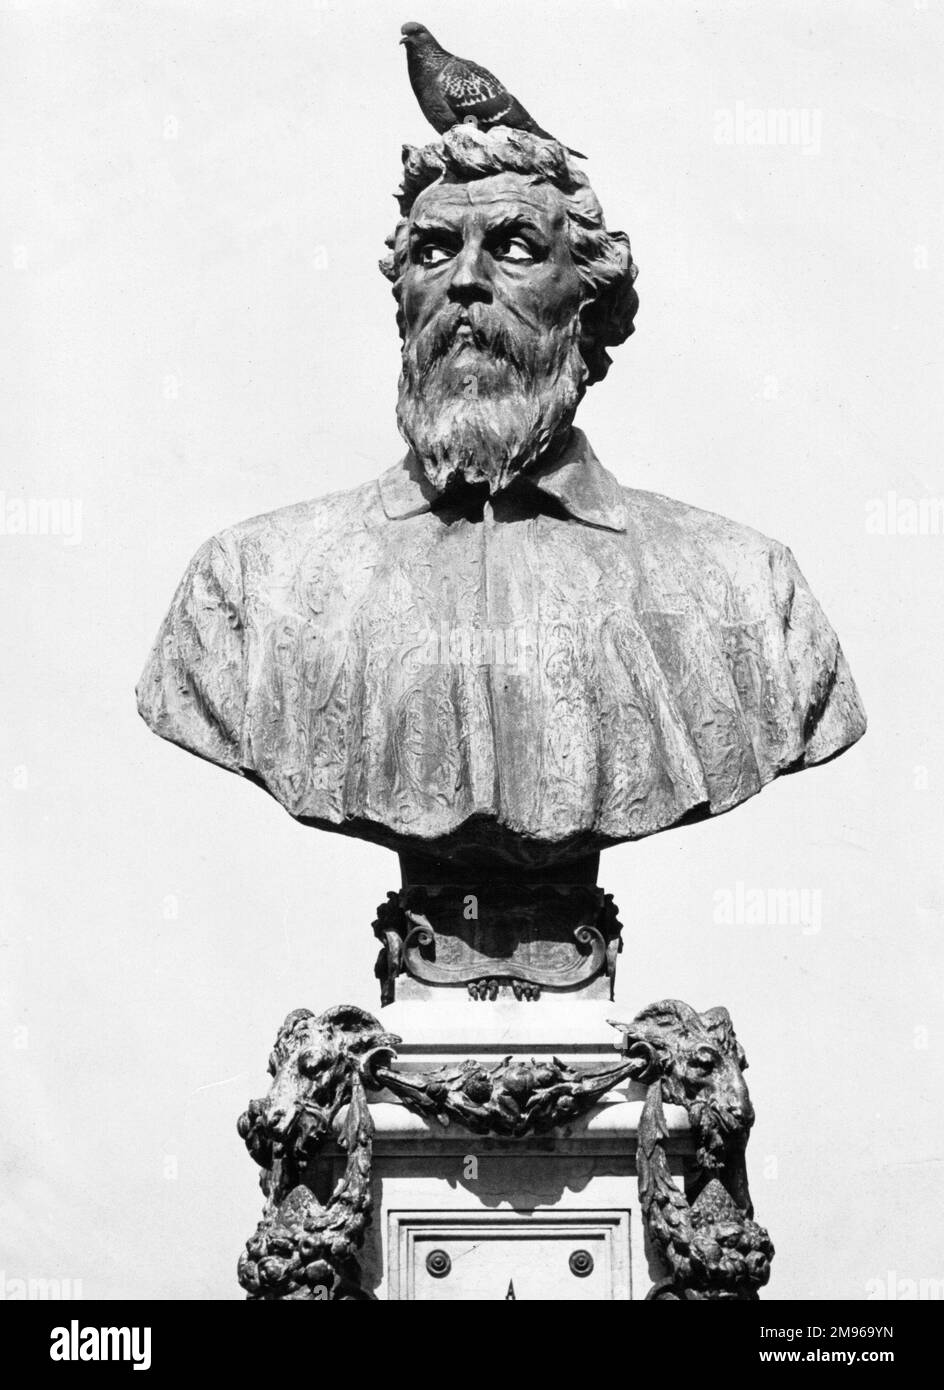 A portrait bust on Benvenuto Cellini (1500-1571), celebrated Italian goldsmith, sculptor, painter, soldier and musician, on the Ponte Vecchio in Florence, Italy, with a pigeon perched on its head. Stock Photo